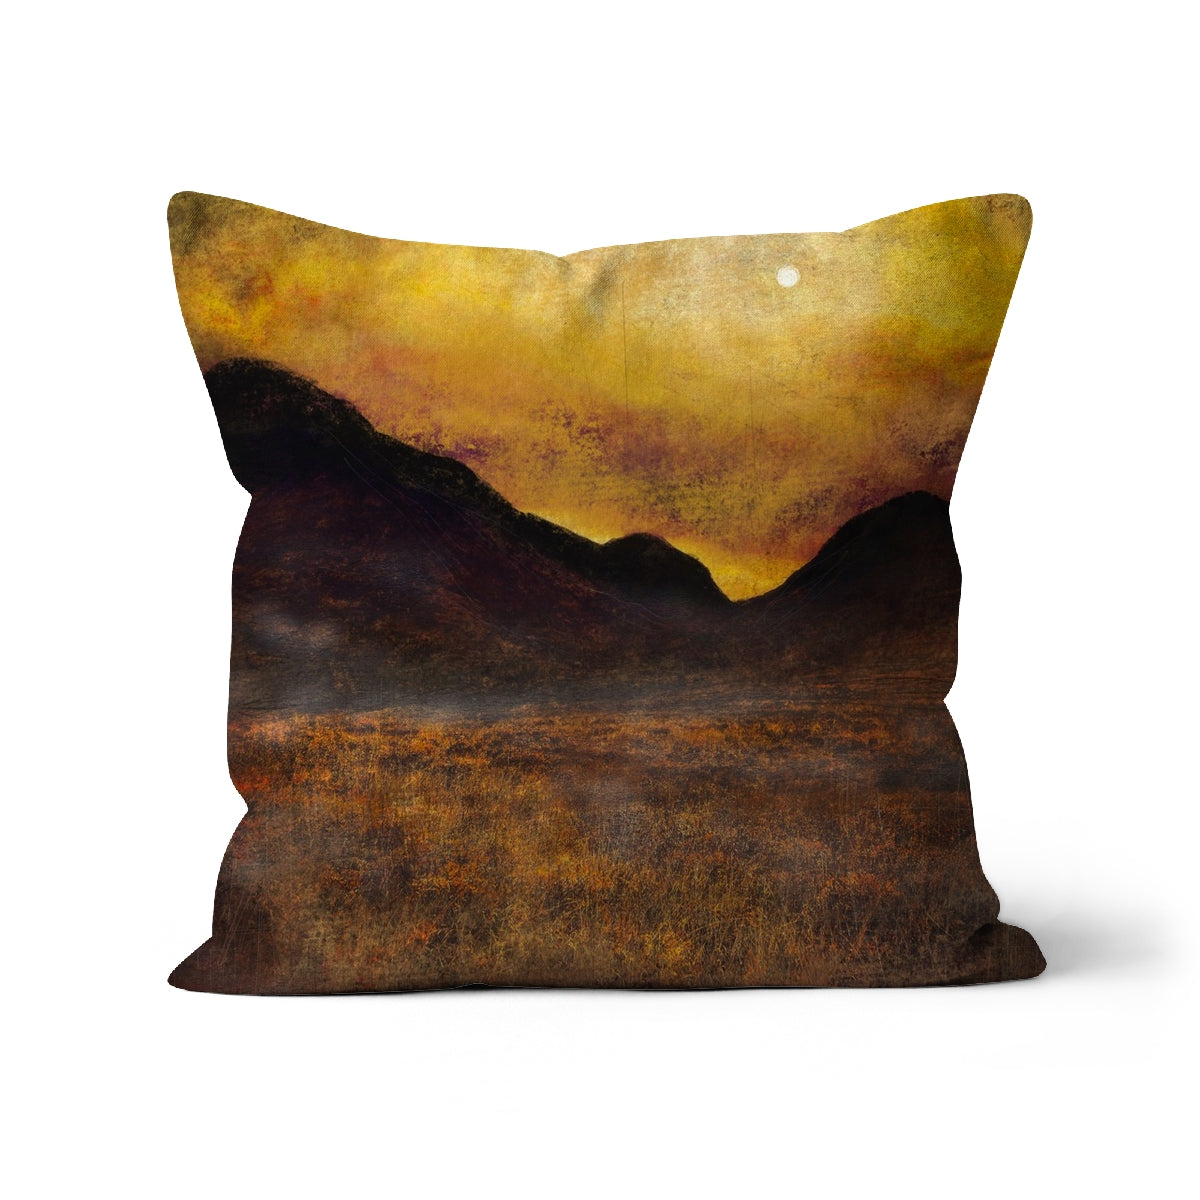 Glencoe Moonlight Art Gifts Cushion-Cushions-Glencoe Art Gallery-Faux Suede-18"x18"-Paintings, Prints, Homeware, Art Gifts From Scotland By Scottish Artist Kevin Hunter